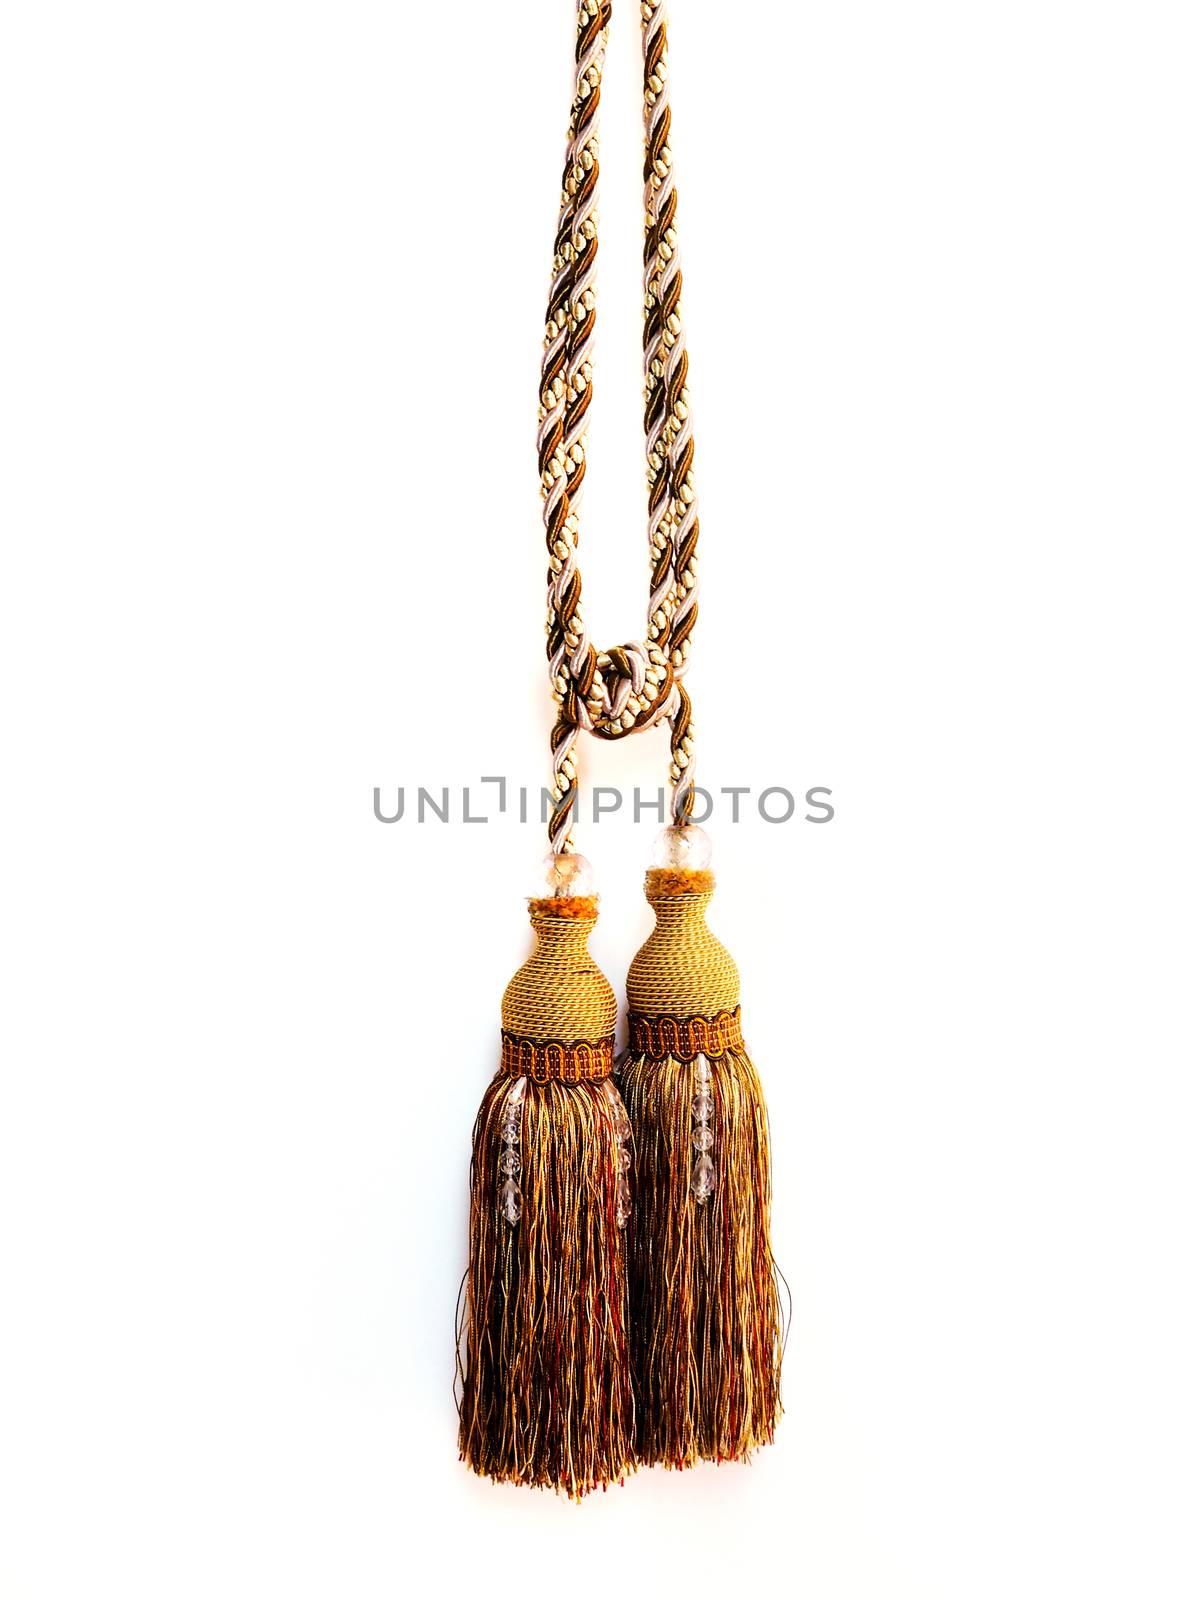 Luxury tassels for beautiful curtain ropes. Isolated on white by kittima05